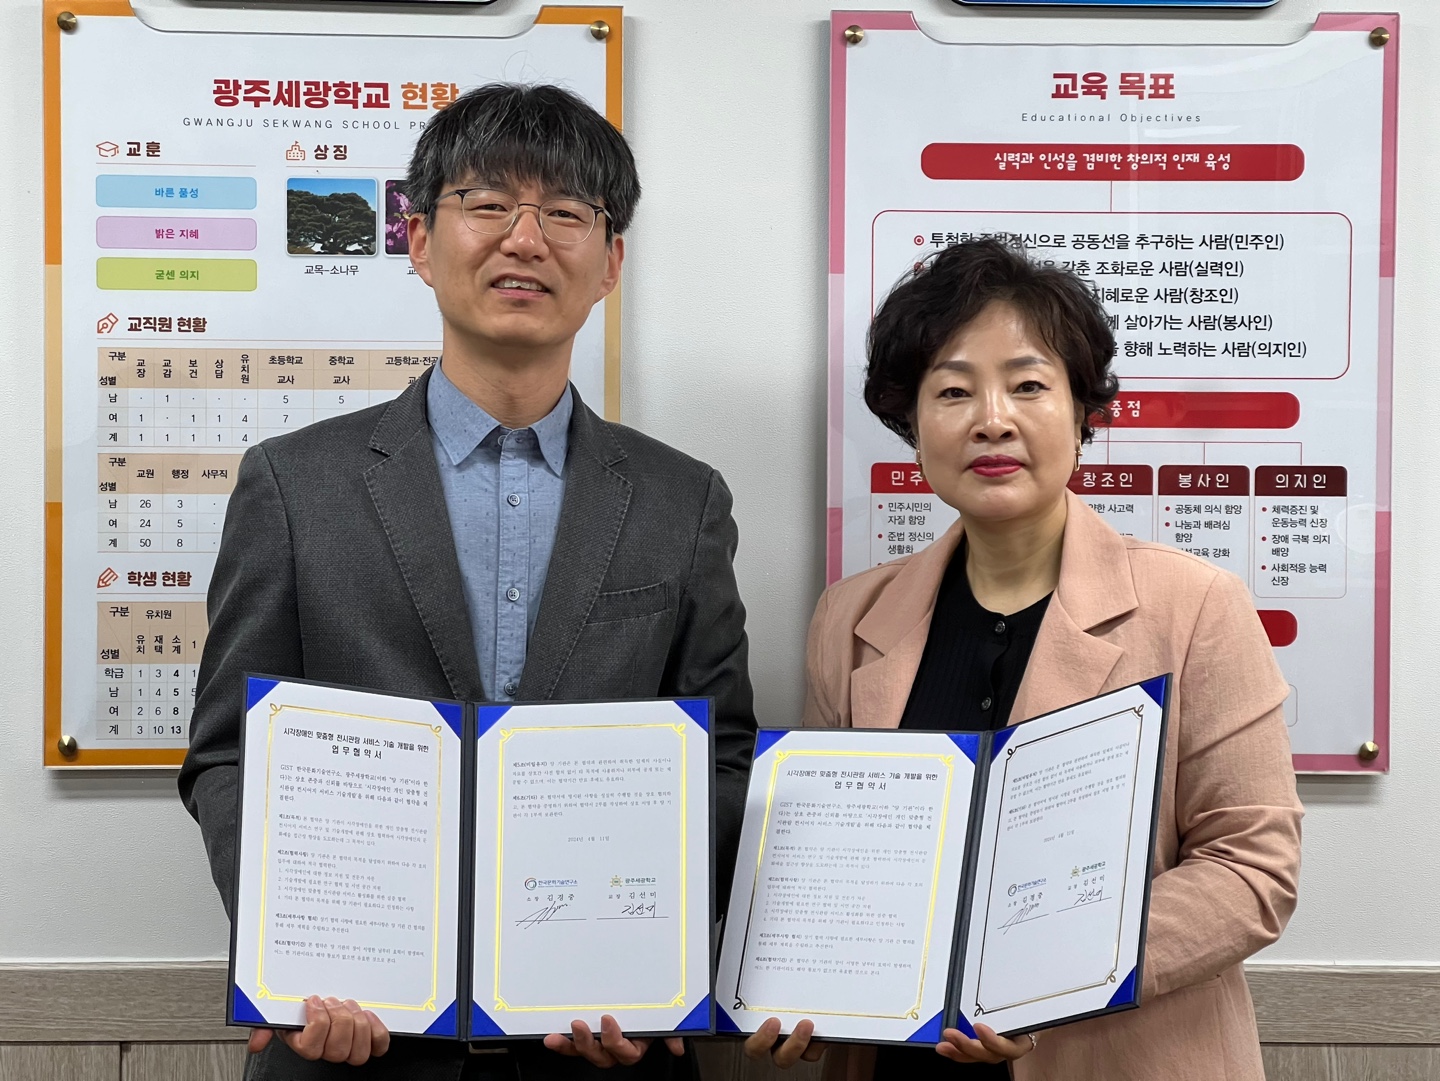 GIST signs an MOU with Gwangju Sekwang School to improve accessibility to culture and arts for the visually impaired 이미지